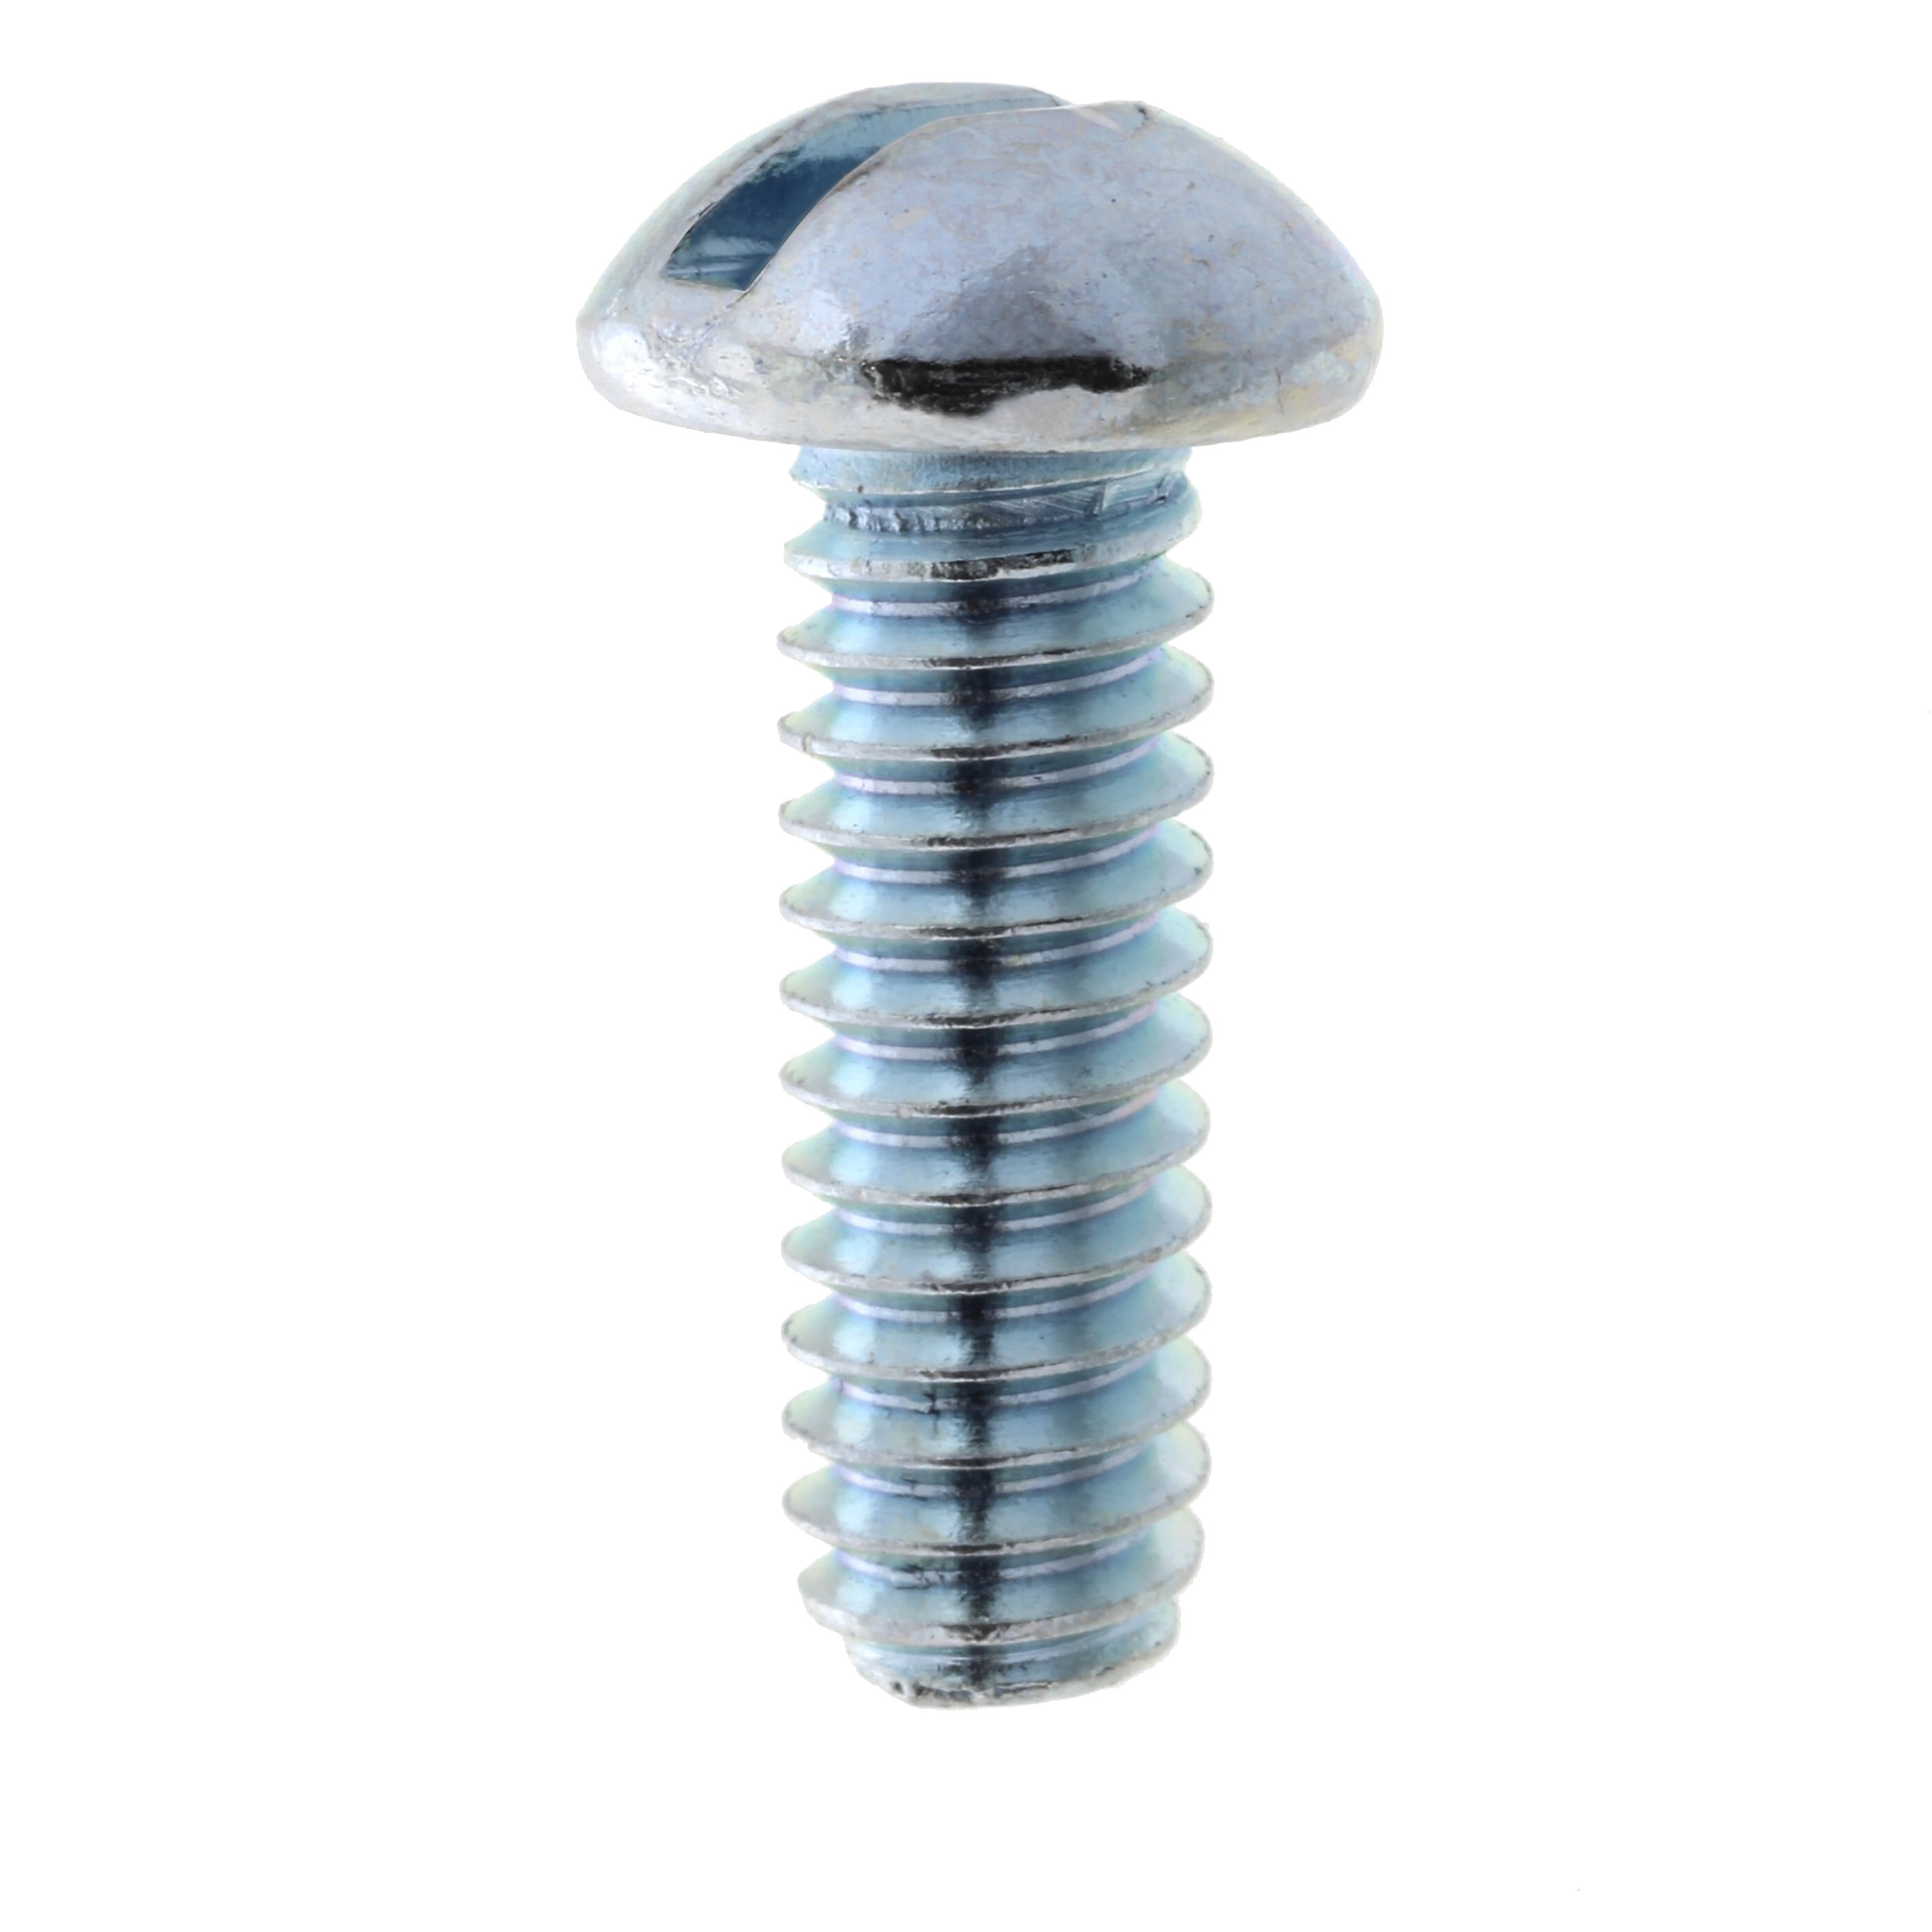 Pan Head Machine Screw 5 pound bags. 1/4-20 x 1/2-in Slotted 